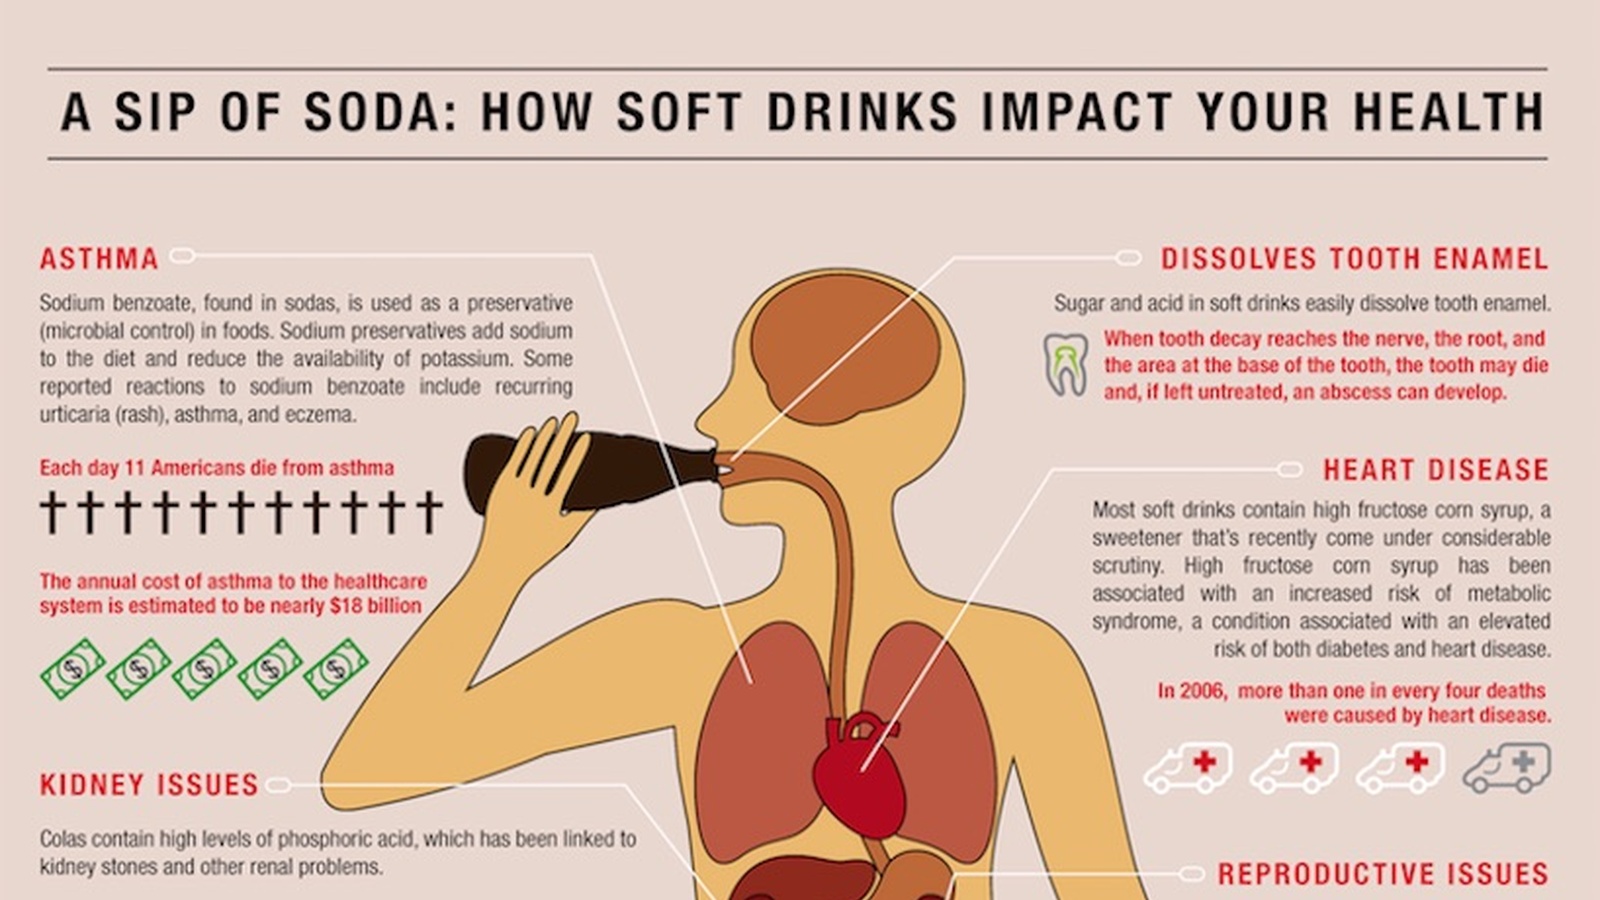 A Sip Of Soda: How Soft Drinks Impact Your Health